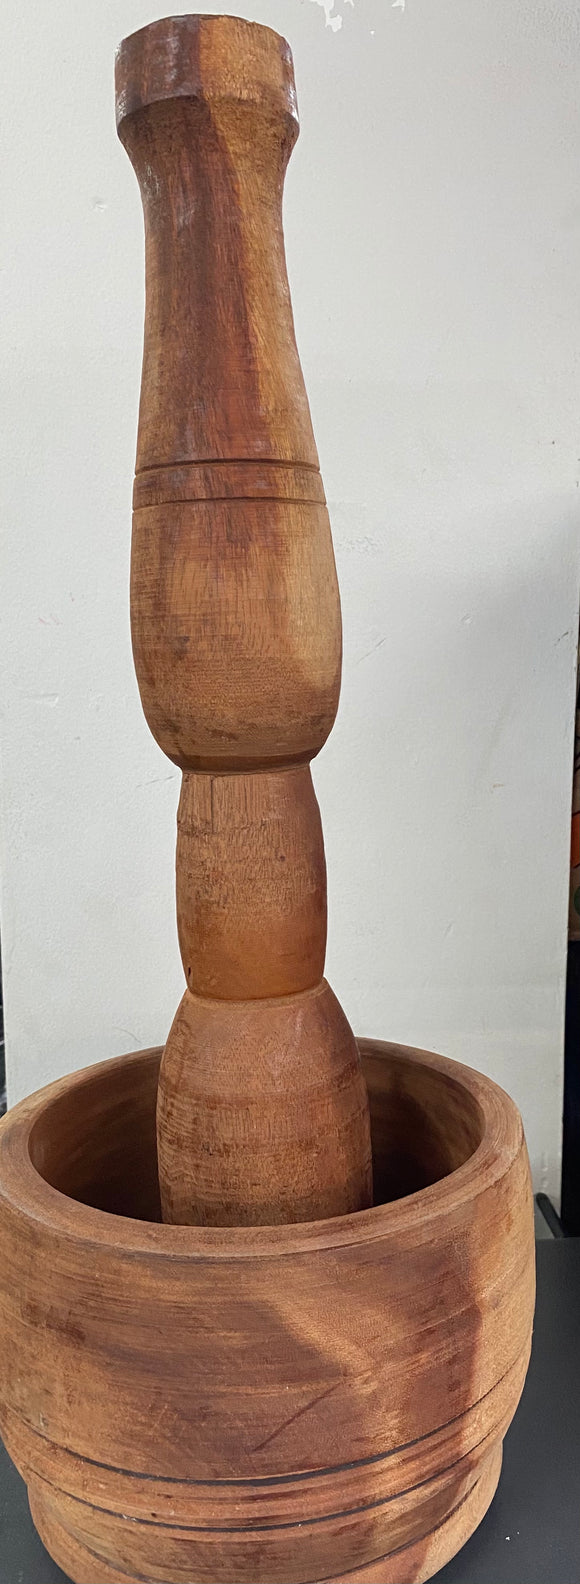 Mortar and pestle small